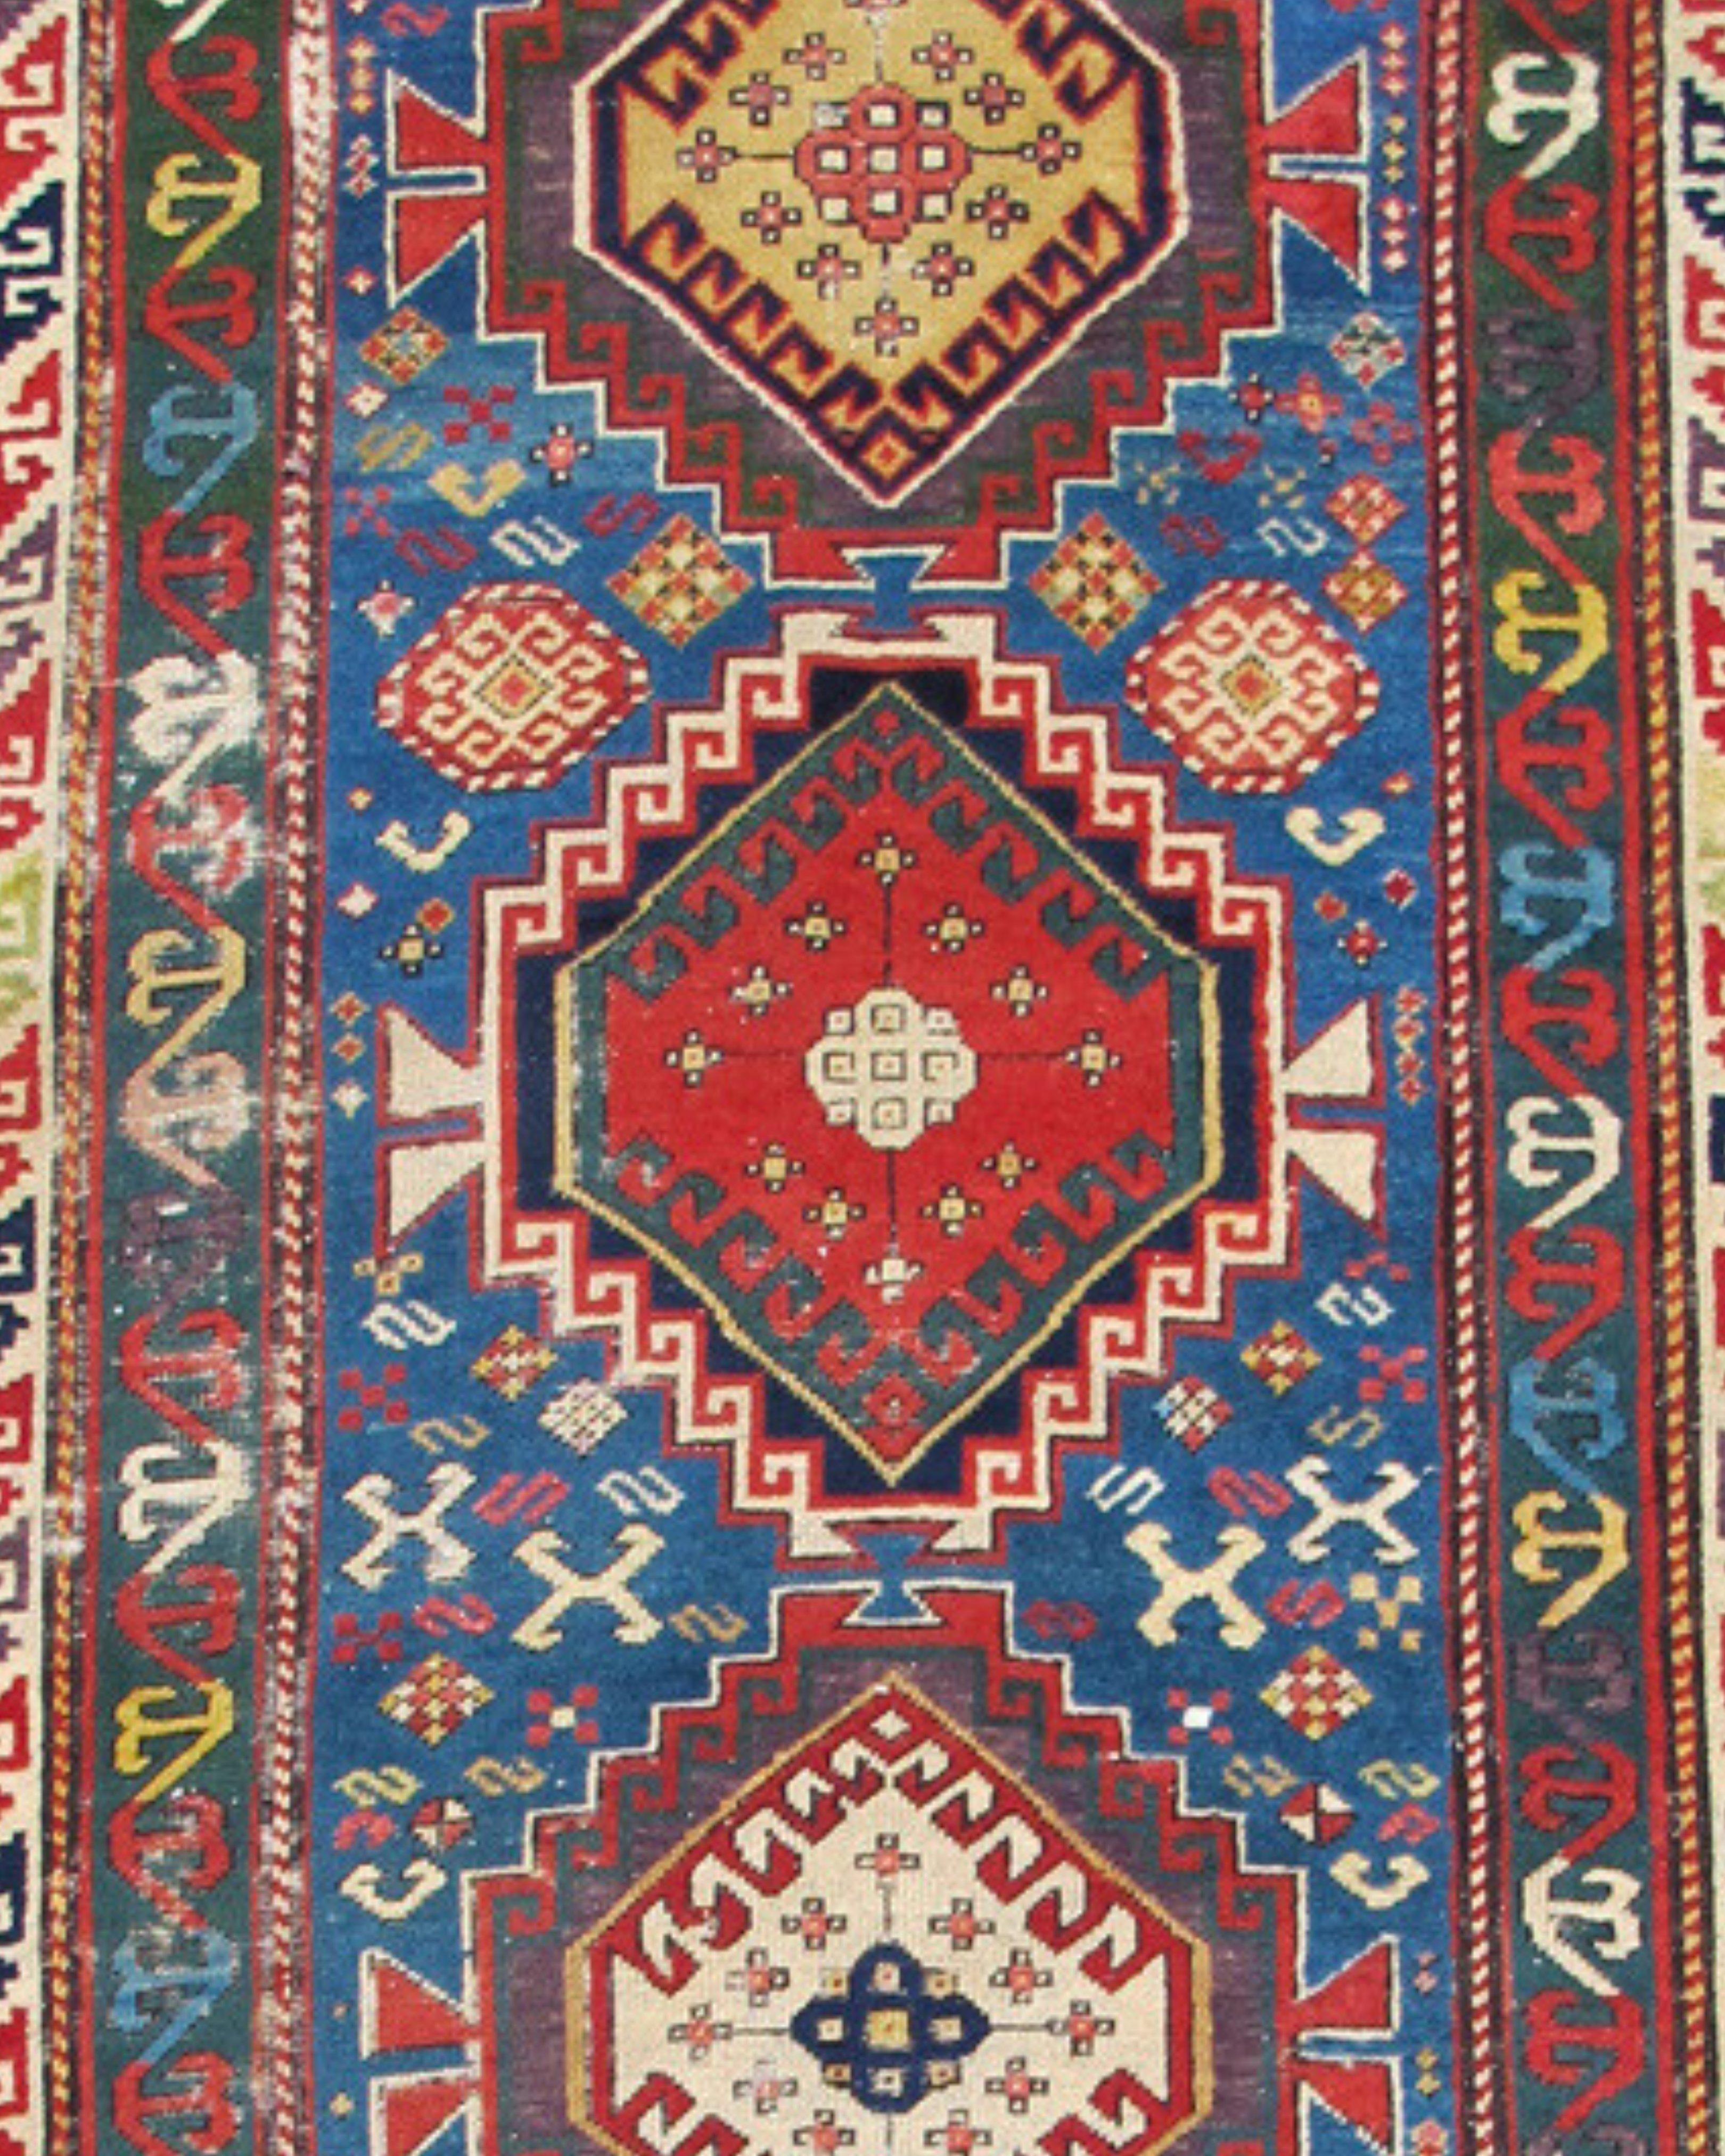 Antique Caucasian Shirvan Rug, 19th Century

Vivid color is used expertly in this fine Shirvan long rug from the South Caucasus. Several blues harmonize with each other while vibrant reds and greens are used for perfect contrast and subtle